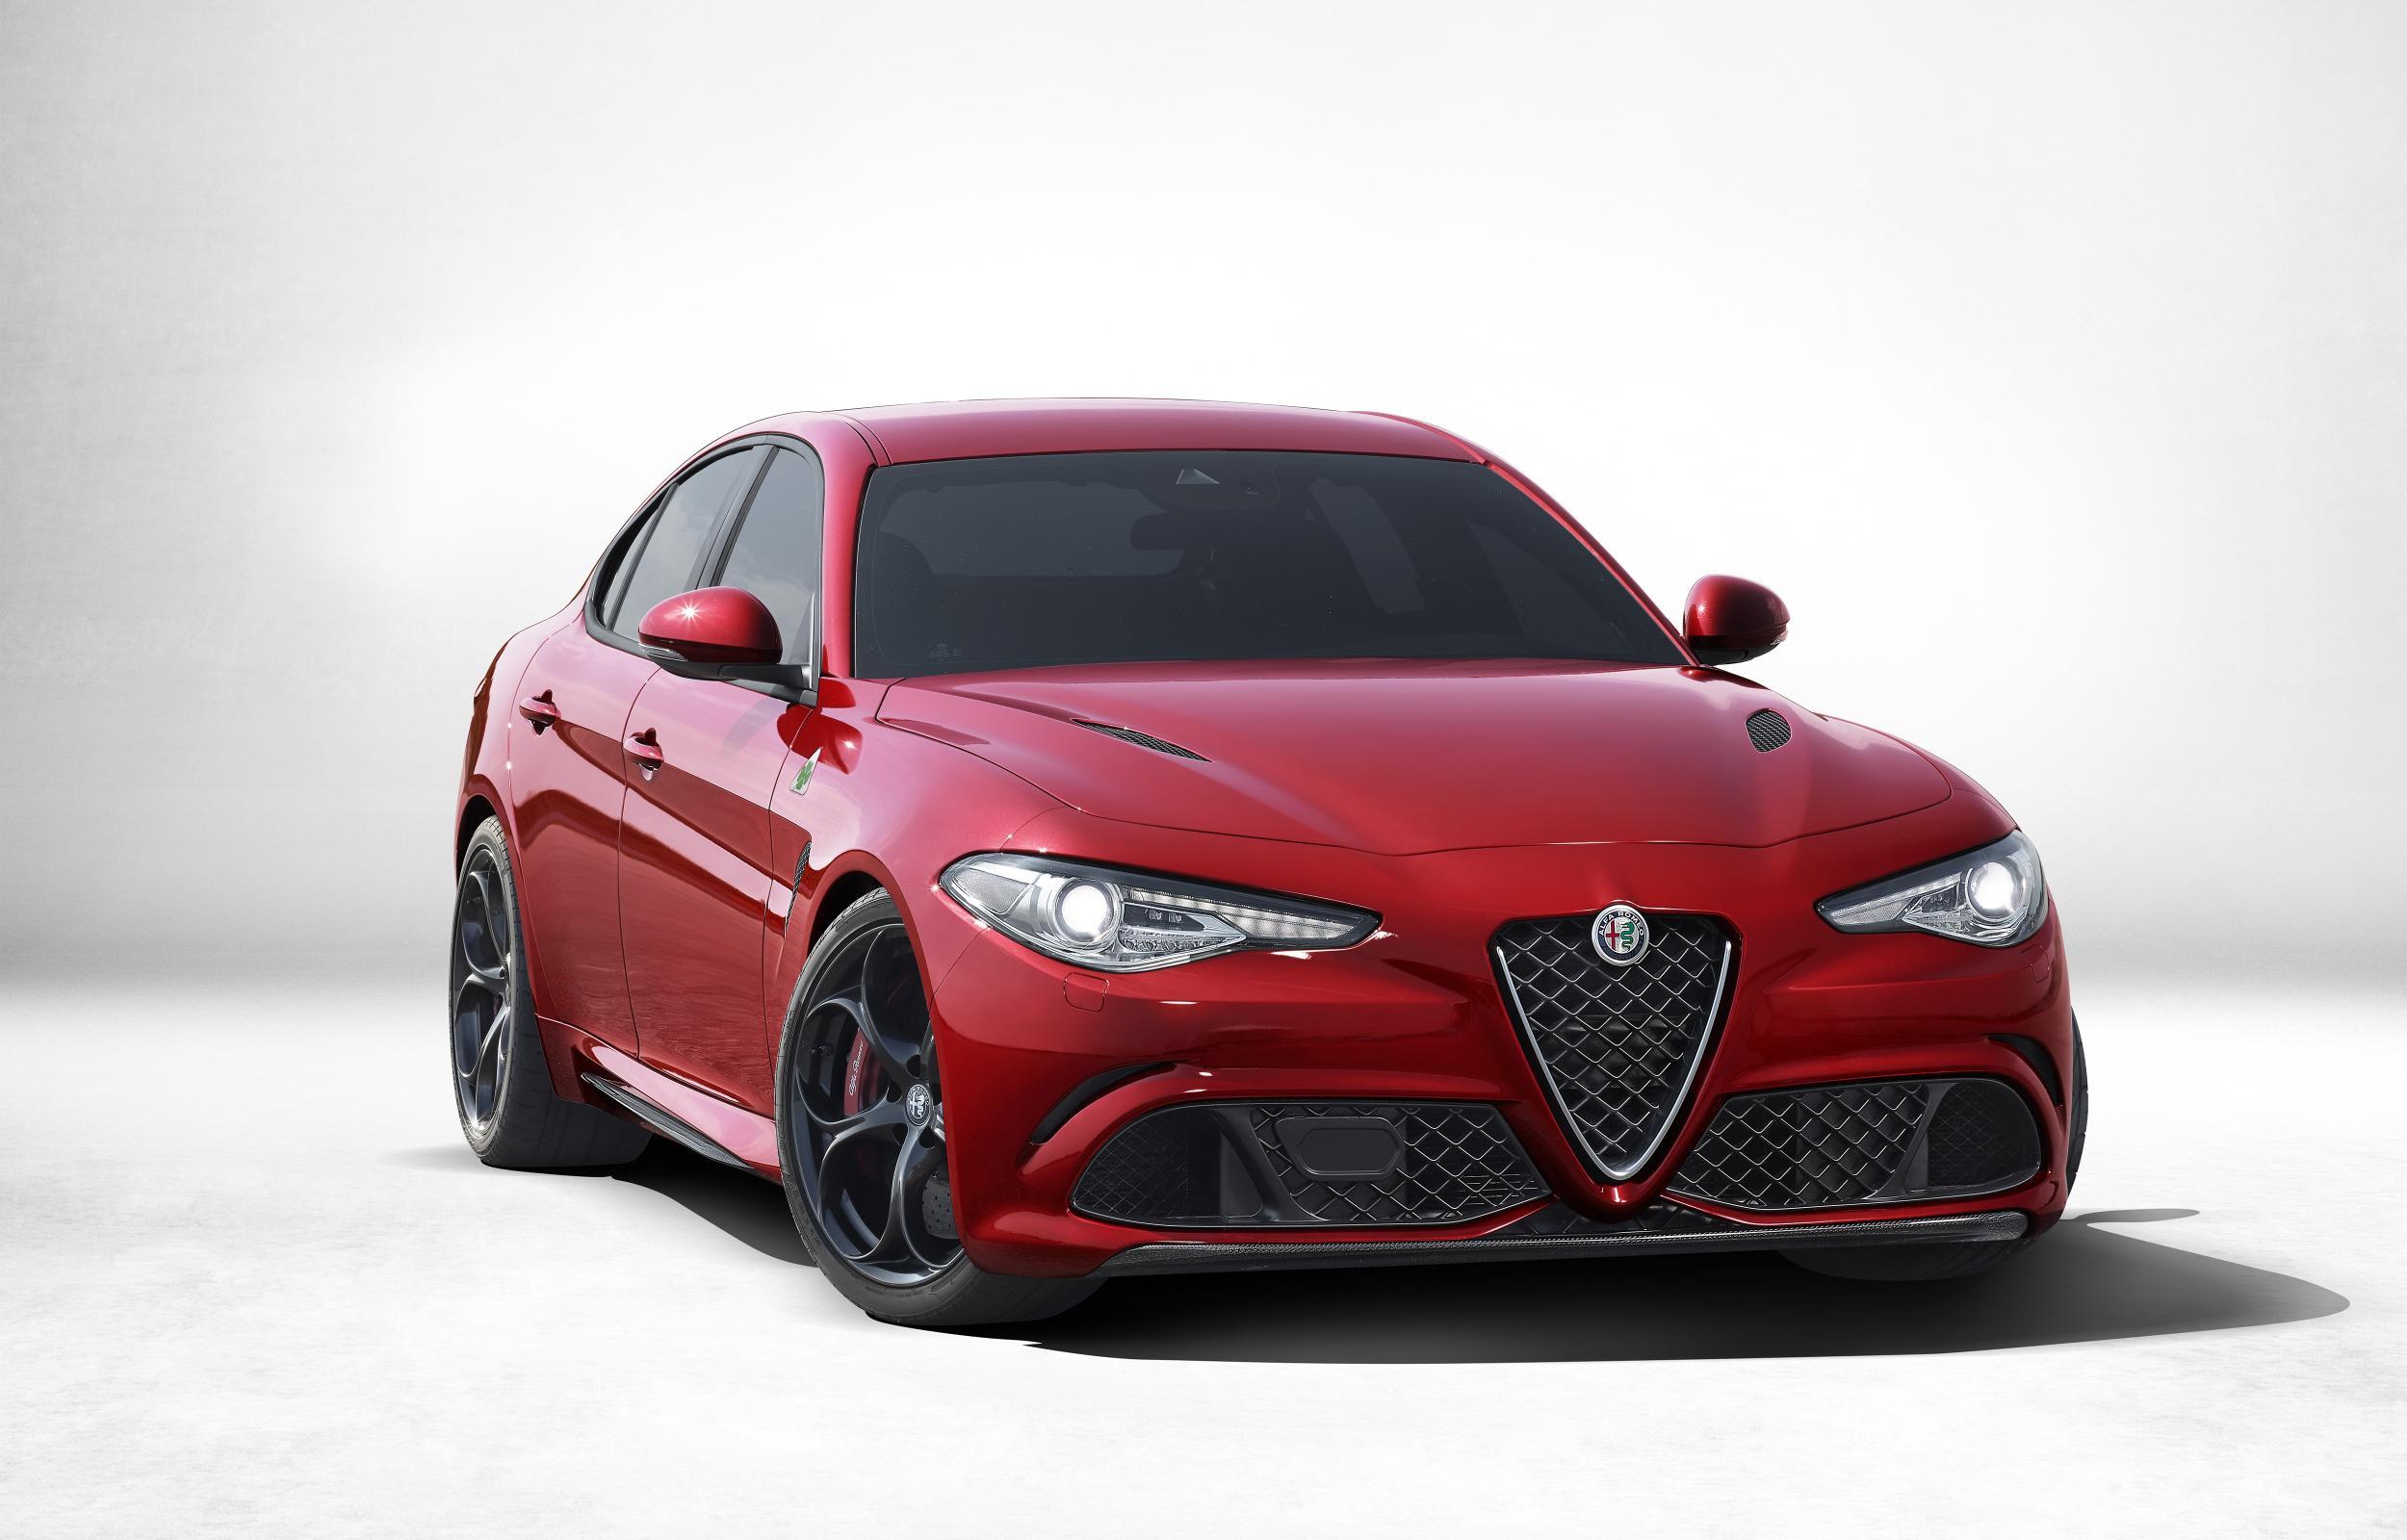 Alfa Romeo Giulia’s Big Brother Could Be Scrapped For Mysterious